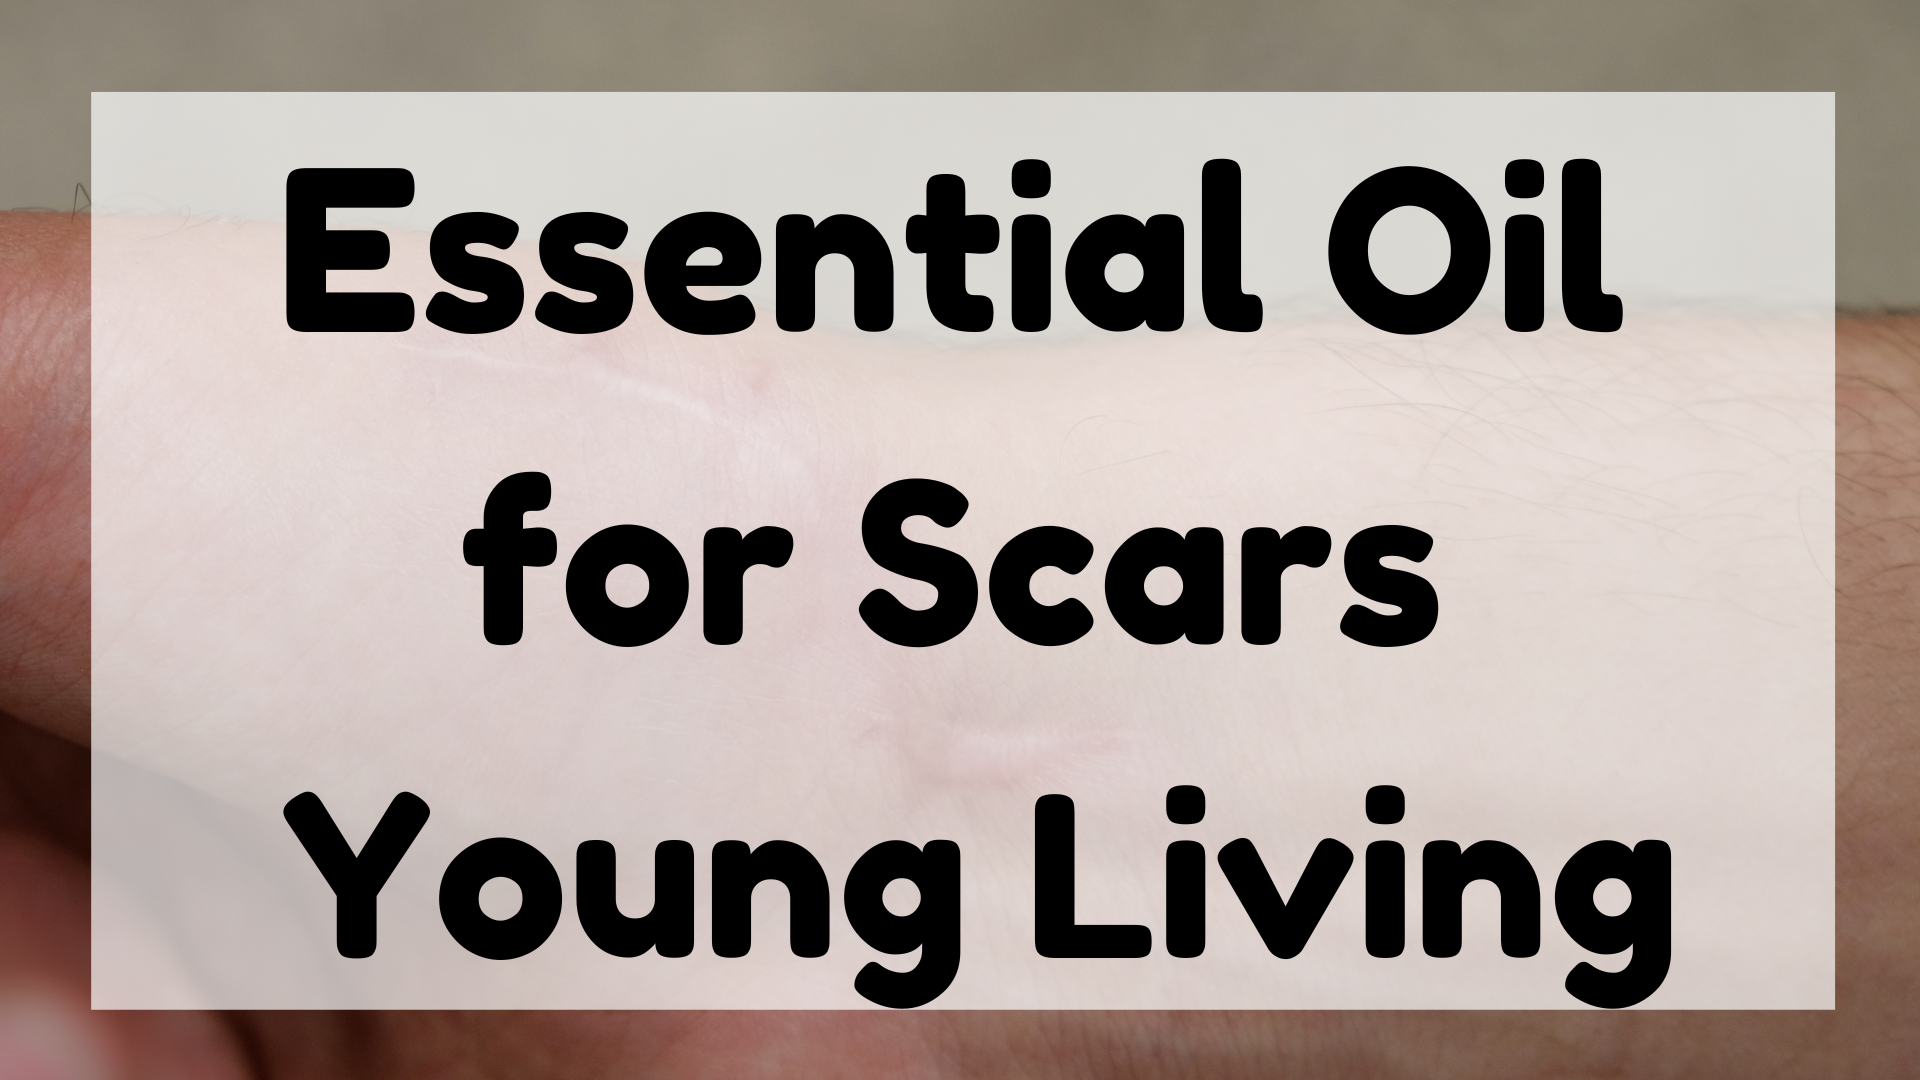 Essential Oil for Scars Young Living featured image